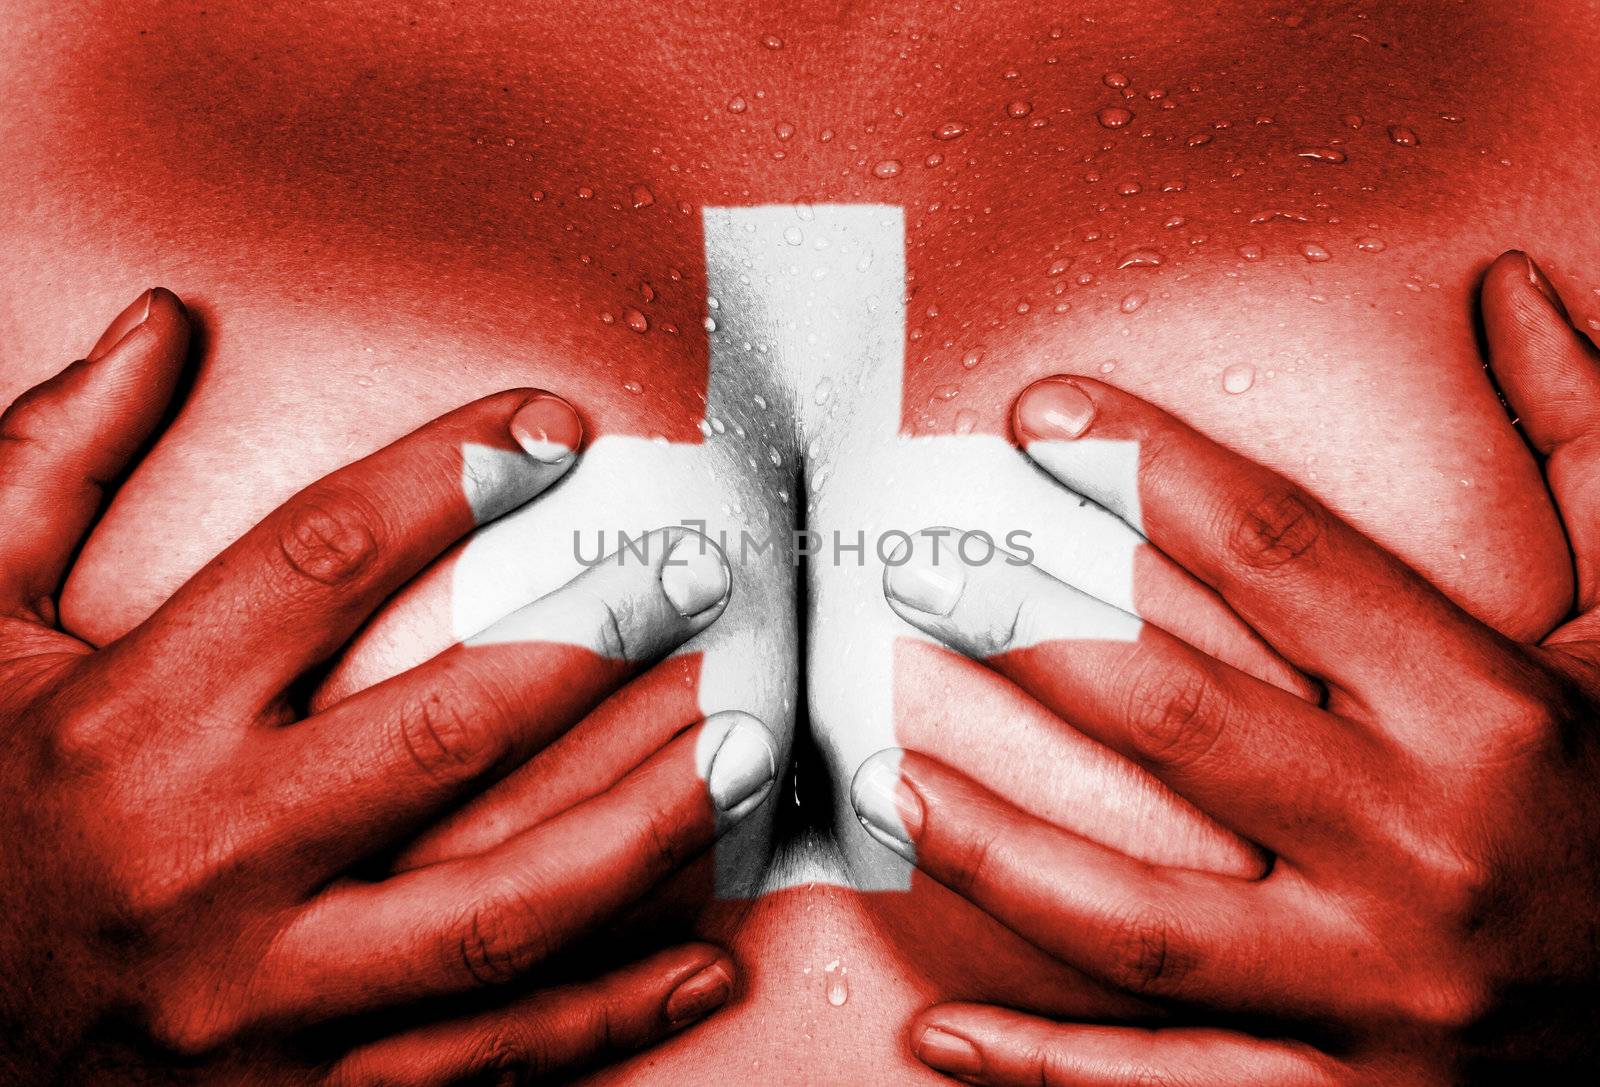 Sweaty upper part of female body, hands covering breasts, flag of Switzerland